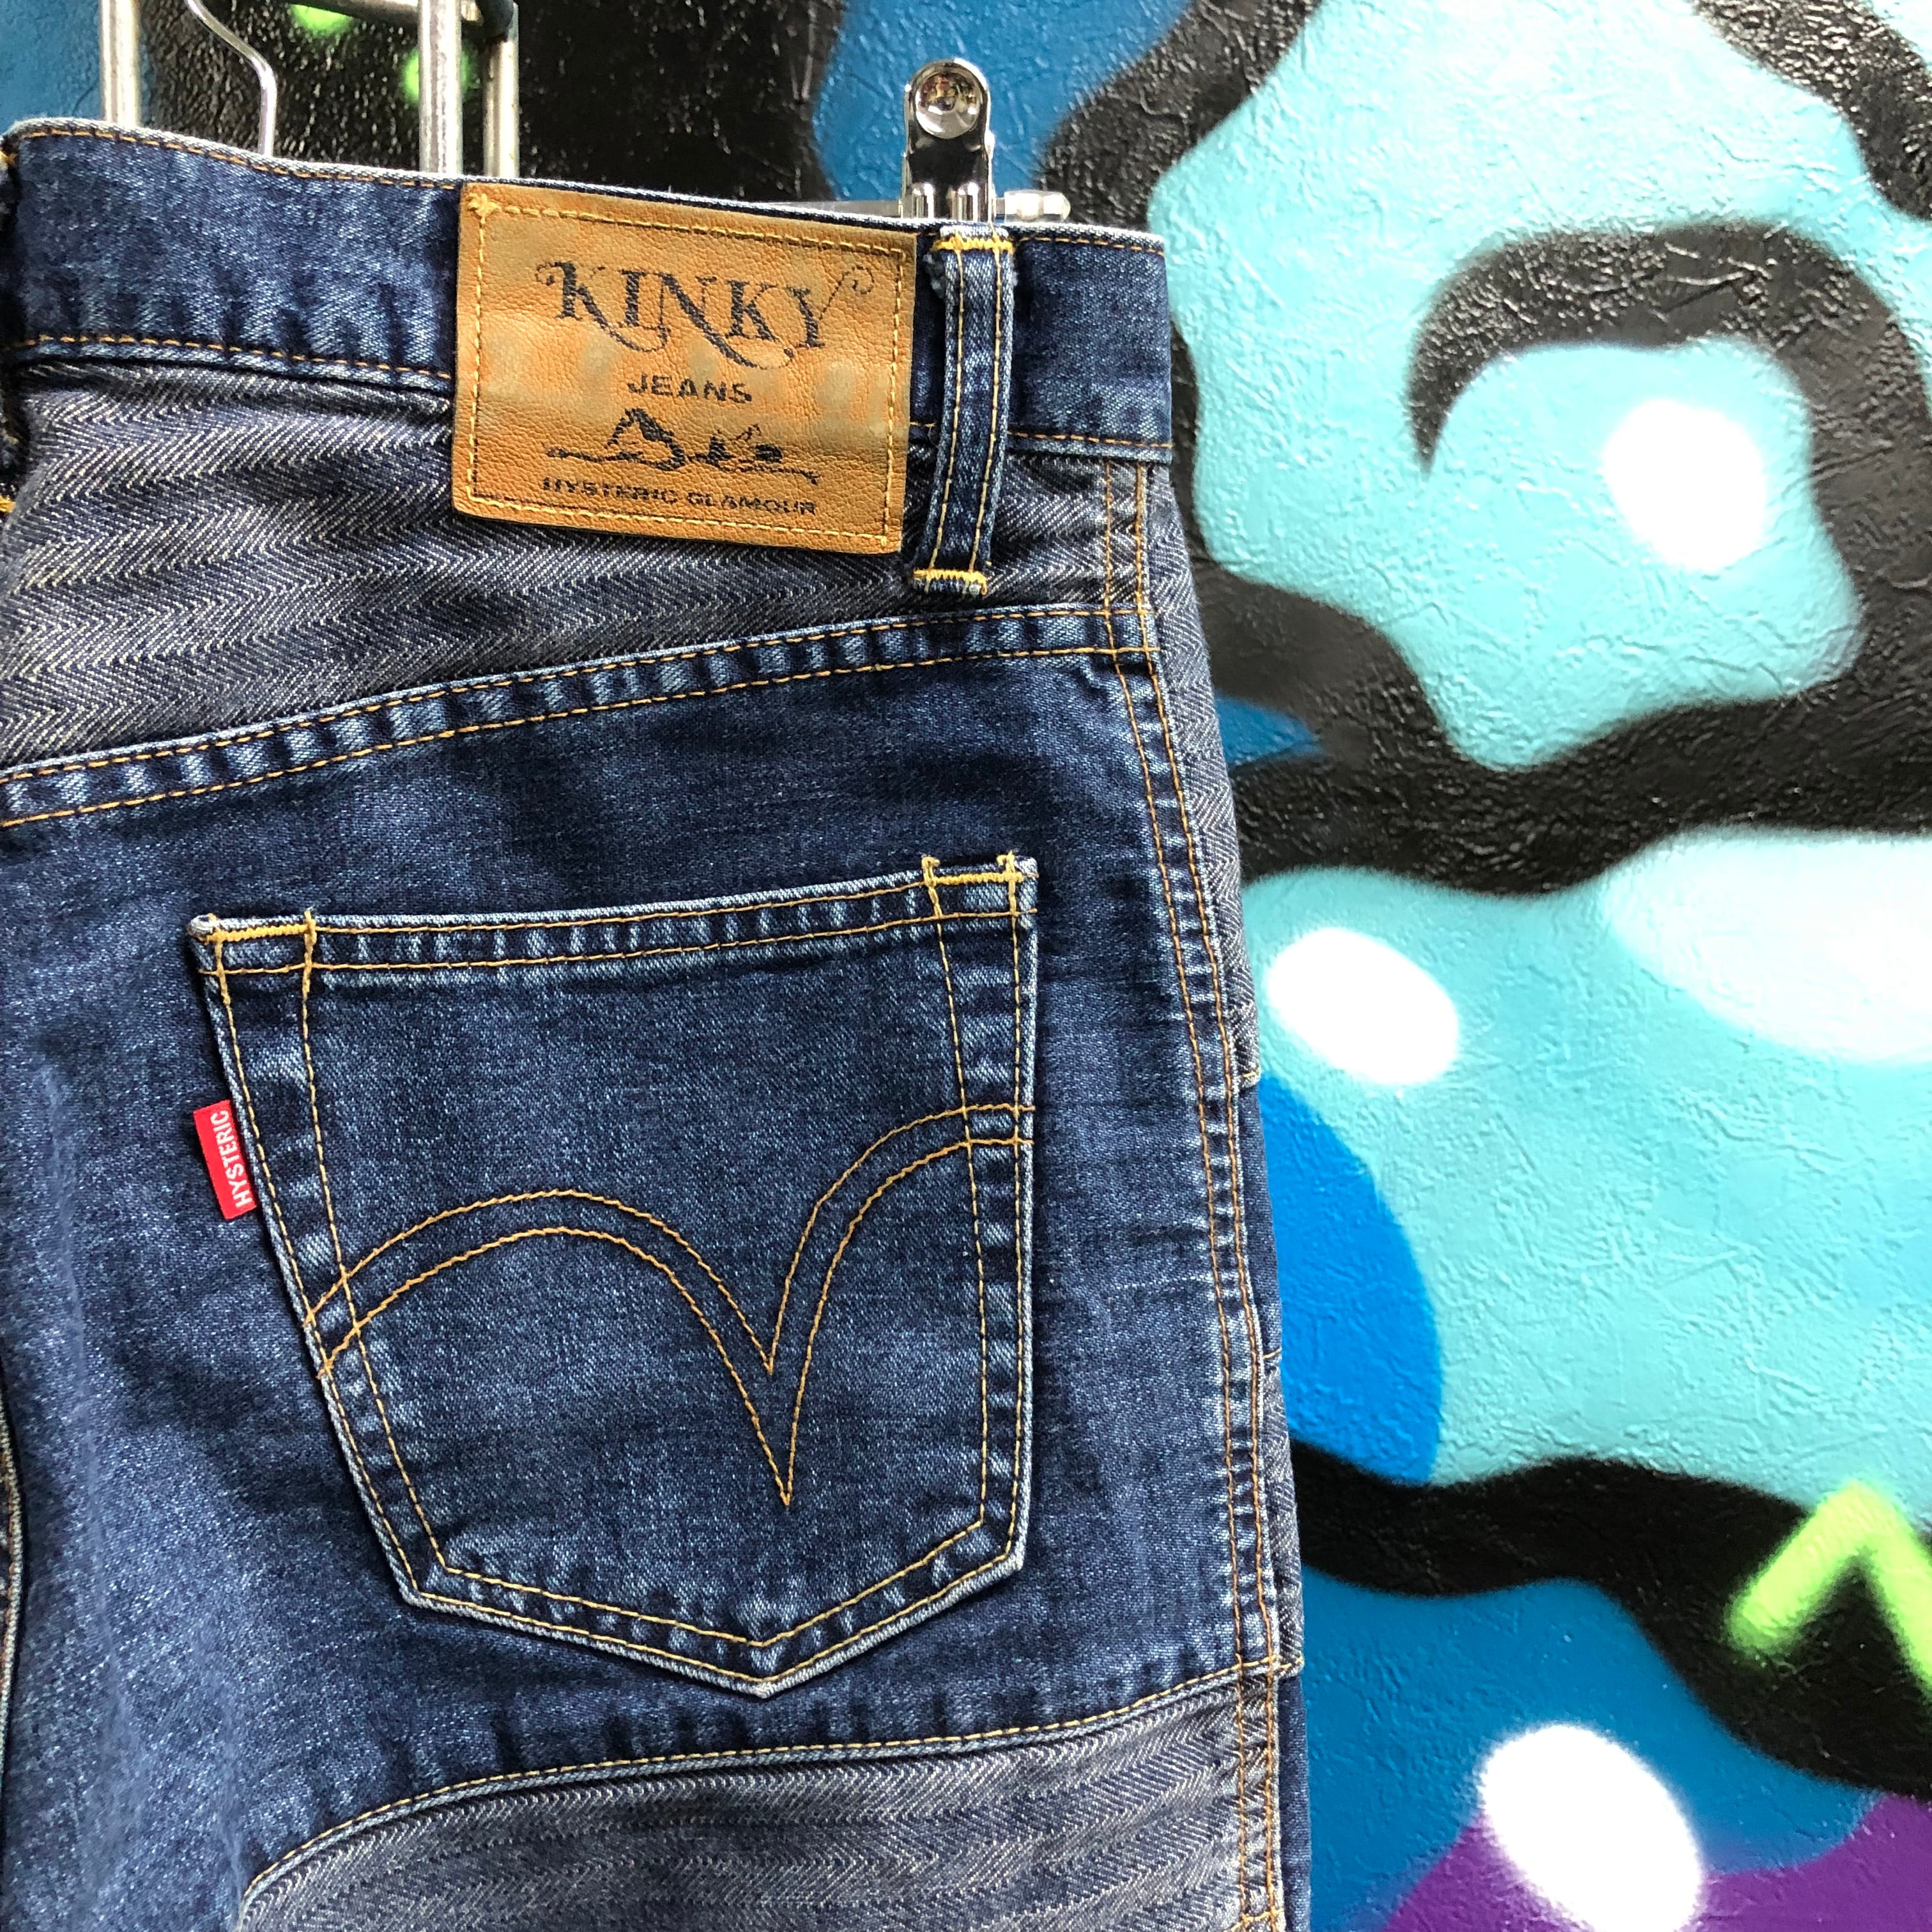 hysteric glamour kinky jeans ウミヘビデニム